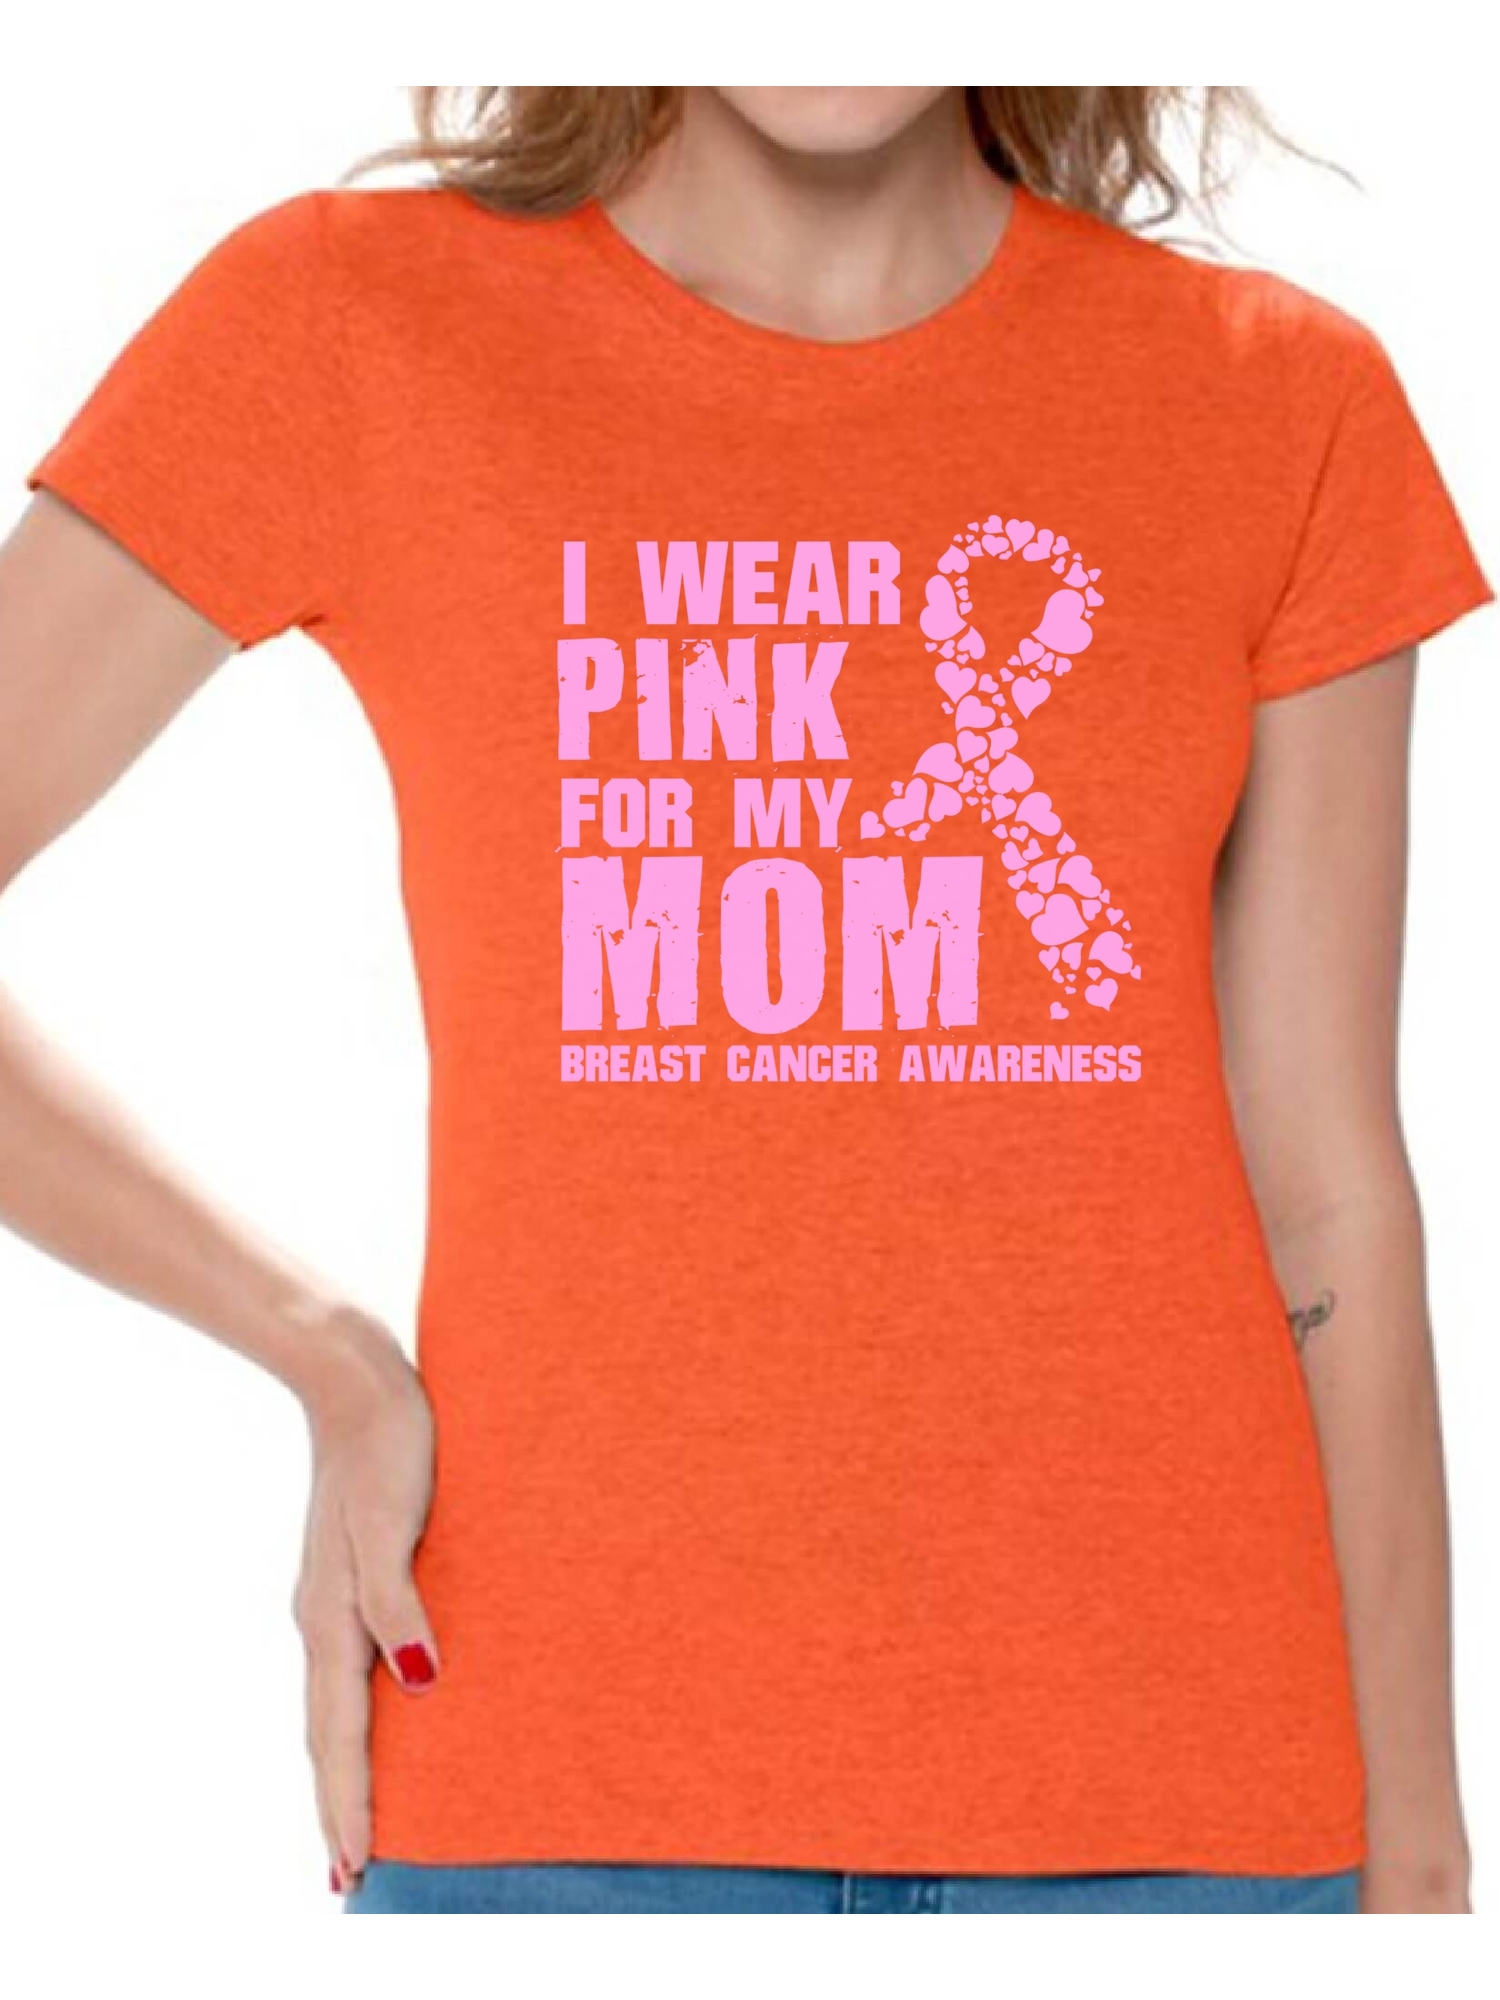 Awkward Styles Women's I Wear Pink for My Mom Graphic T-shirt Tops Breast Cancer Awareness - image 1 of 4